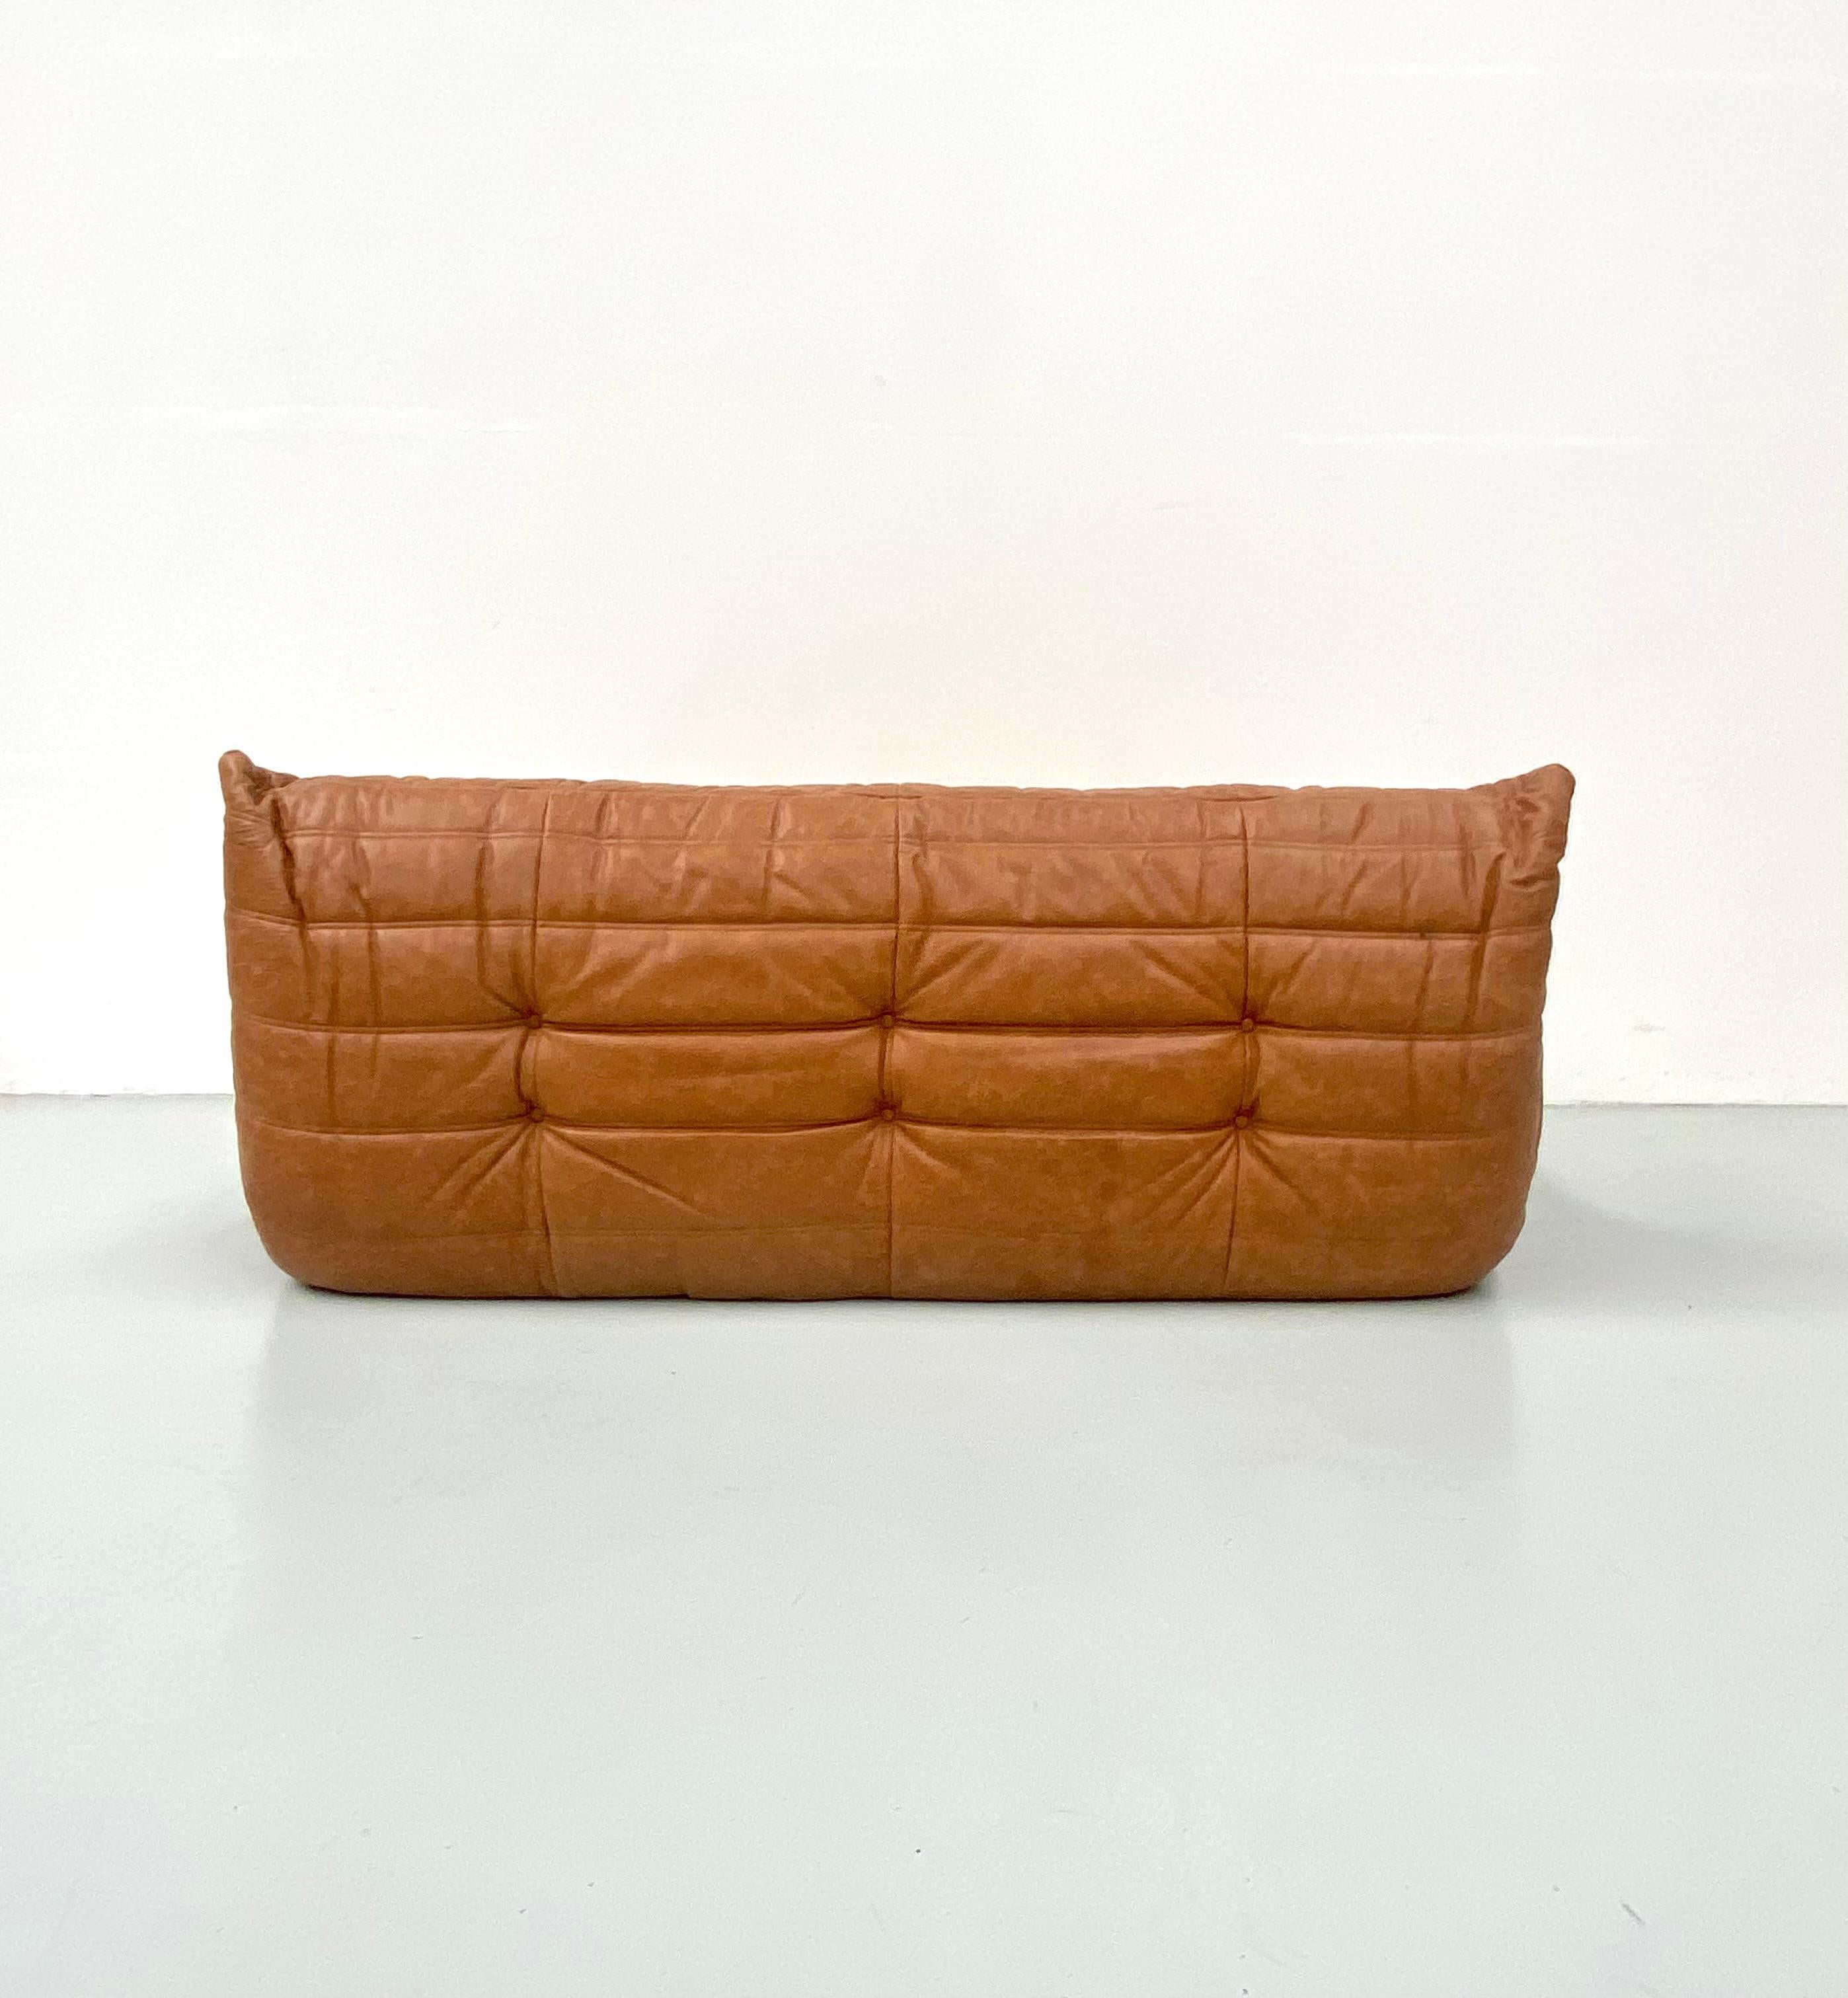 French Vintage Togo Sofa in Cognac Leather by Michel Ducaroy for Ligne Roset 4